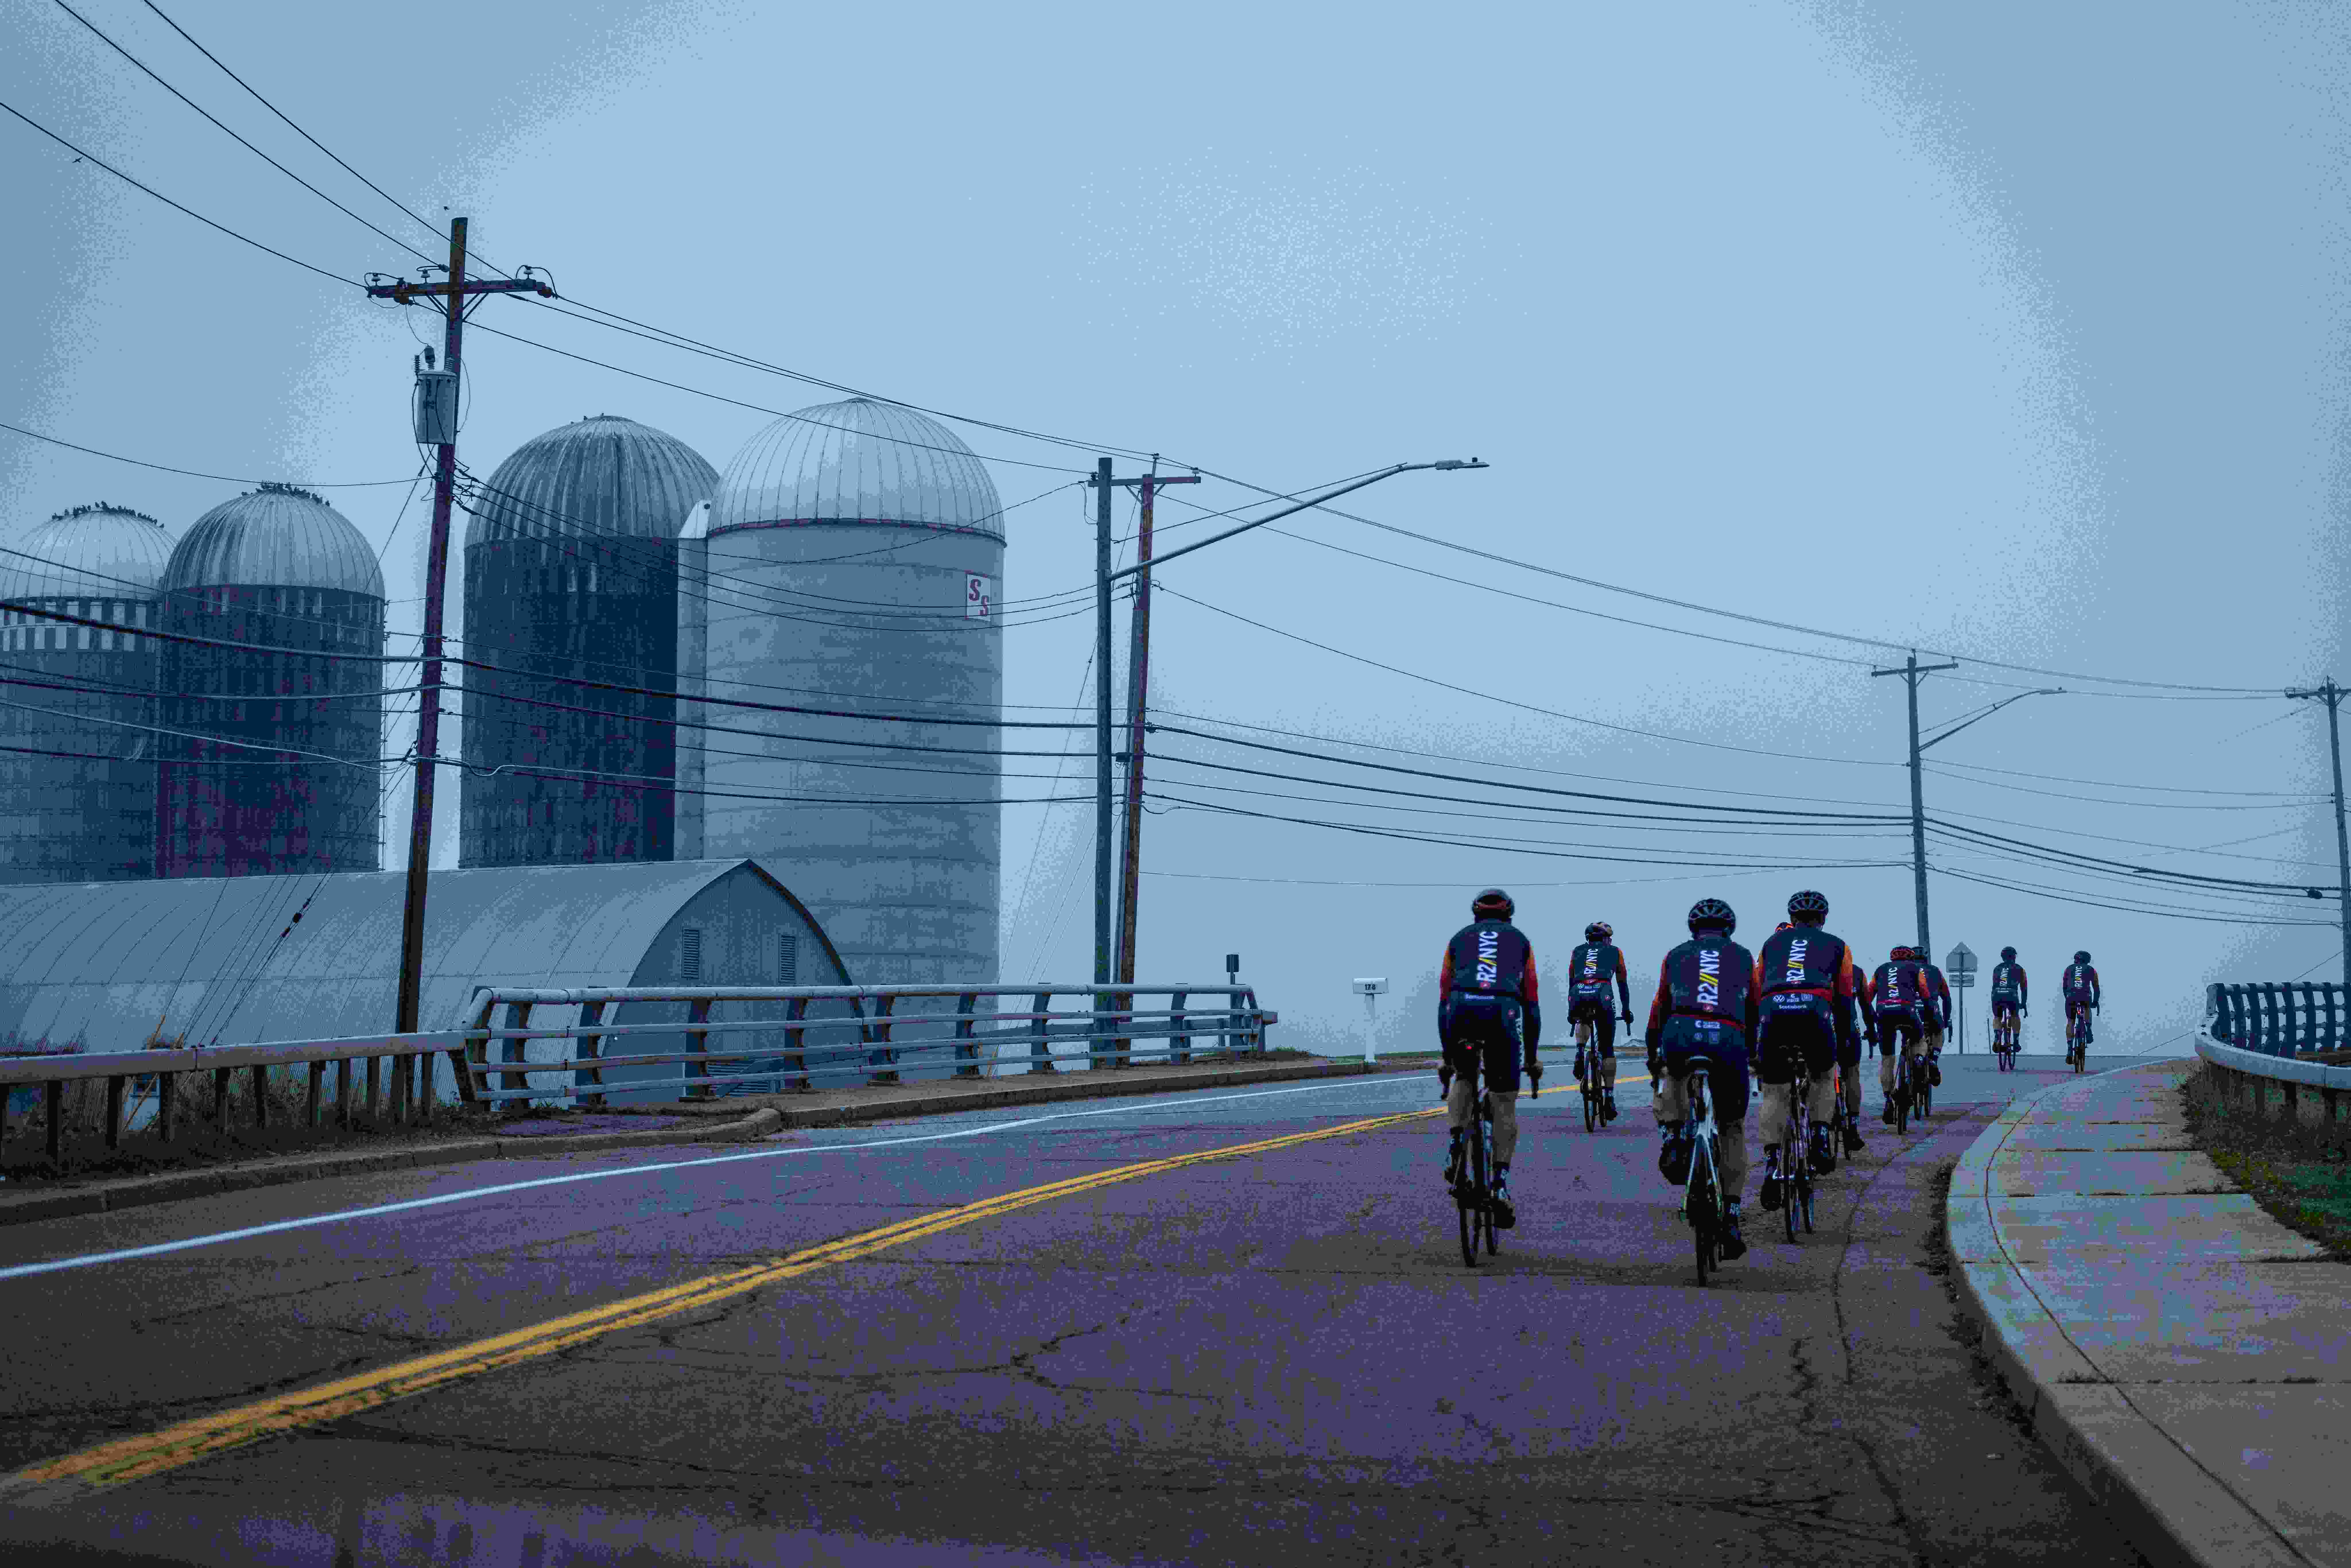 cyclists riding on a cloudy day with silos on the left